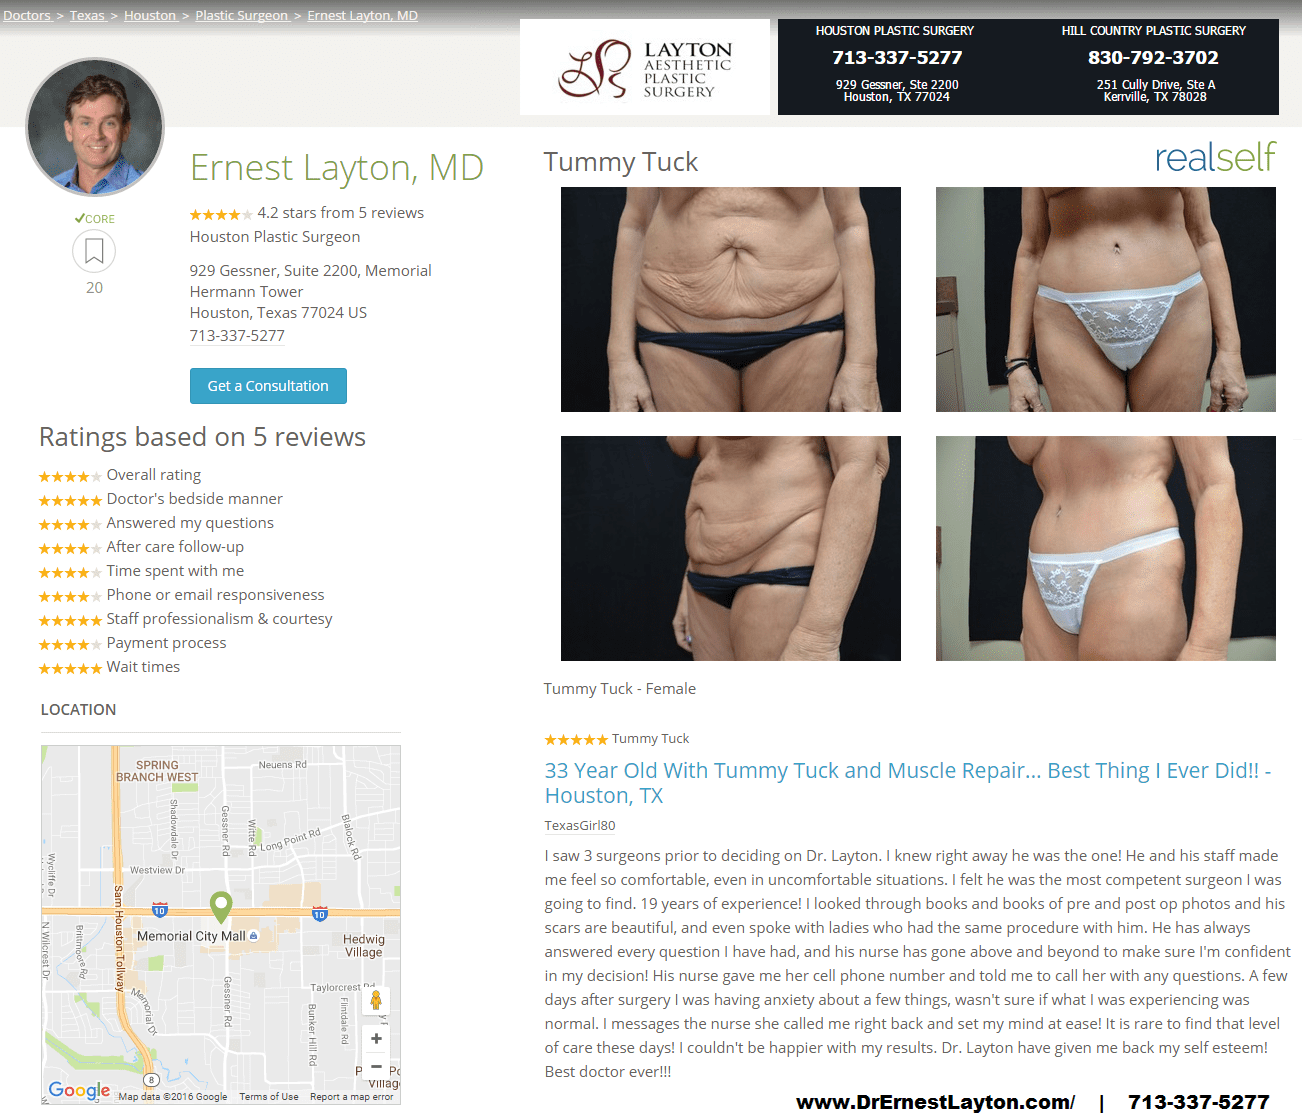 5 stars google review of Tummy Tuck surgery